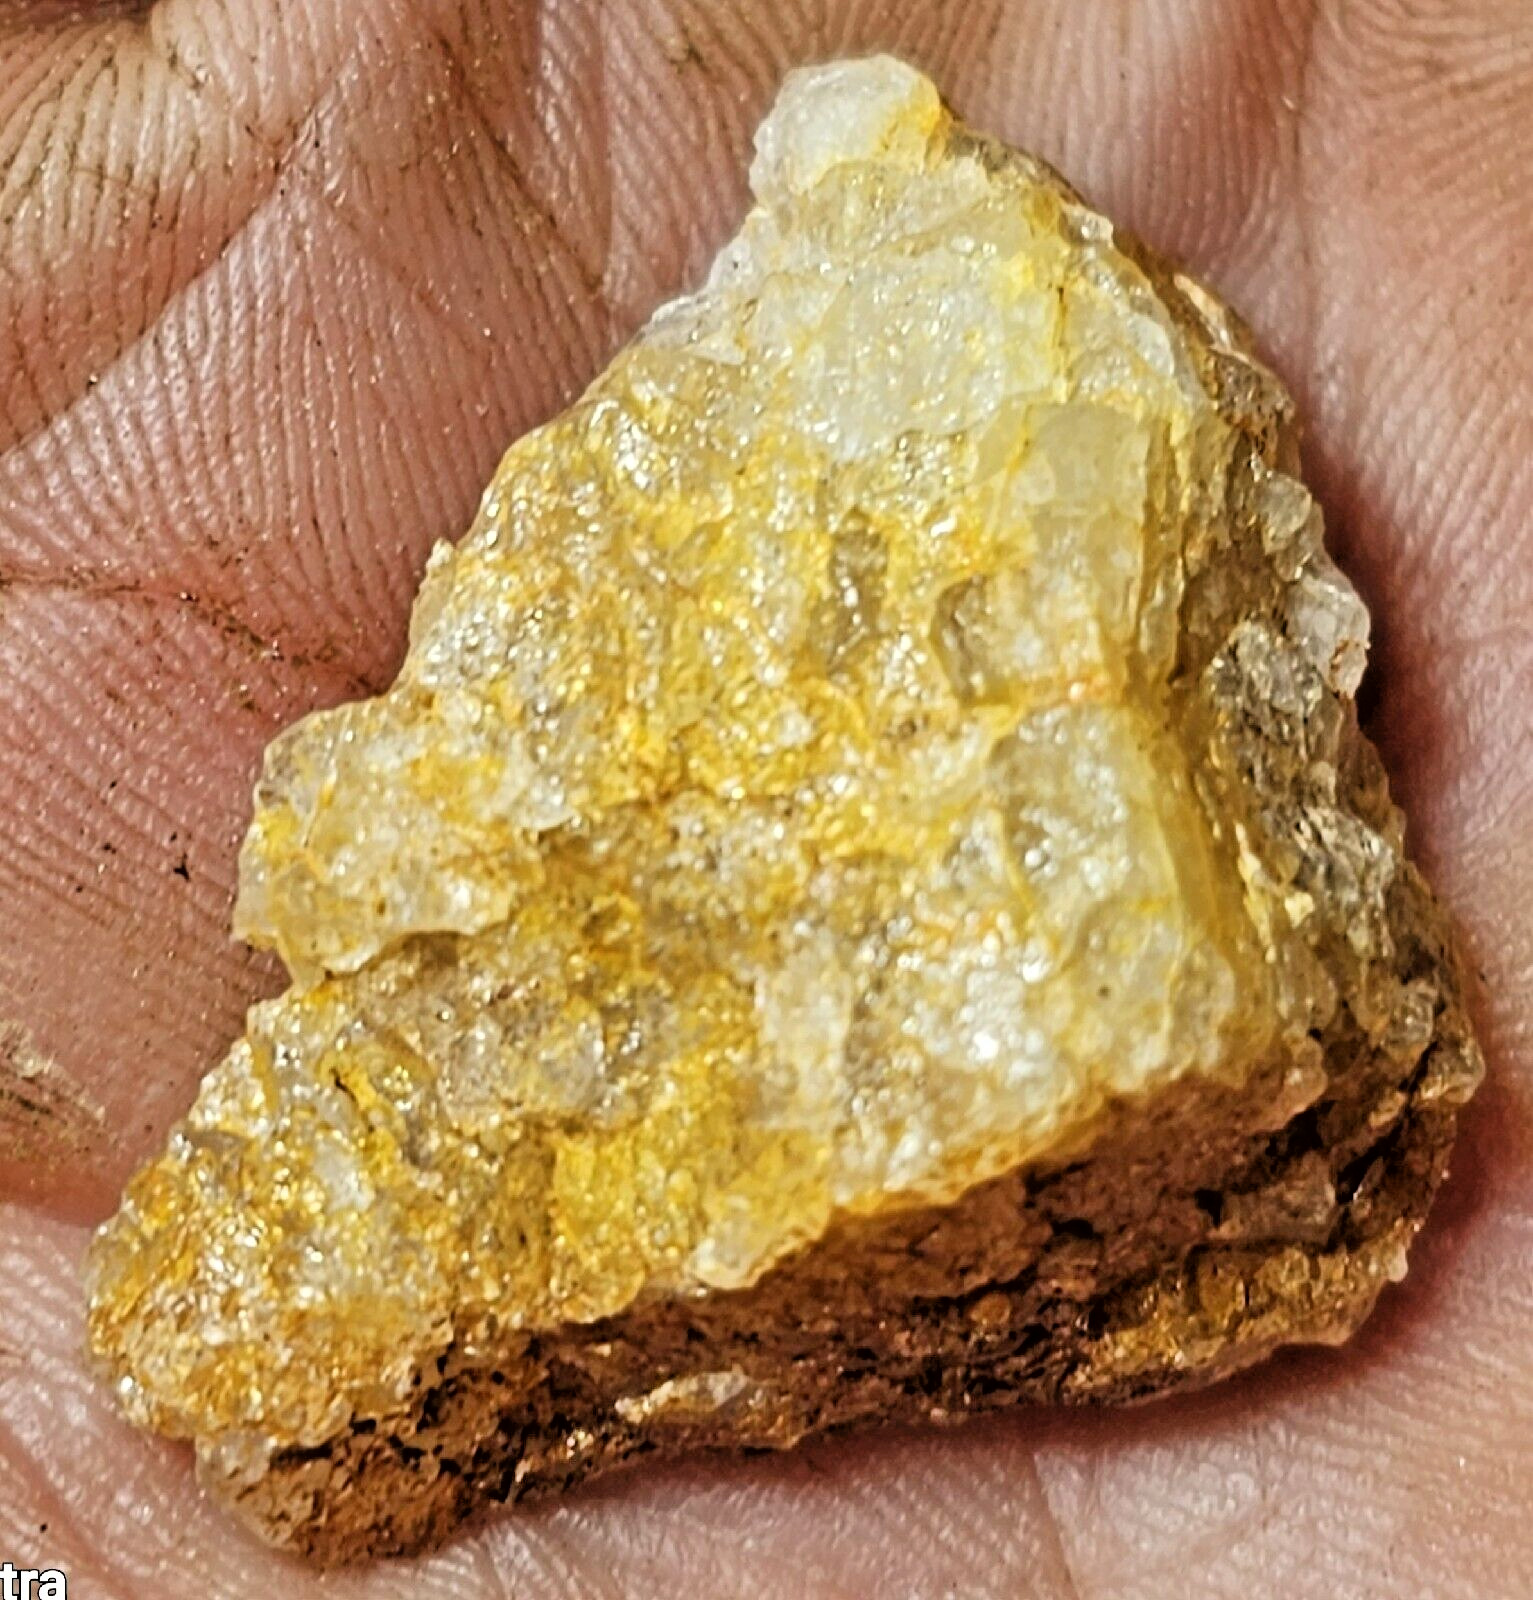 South Carolina Very Rich Specimen Lots Visible Gold Aprox 2 Grams #121